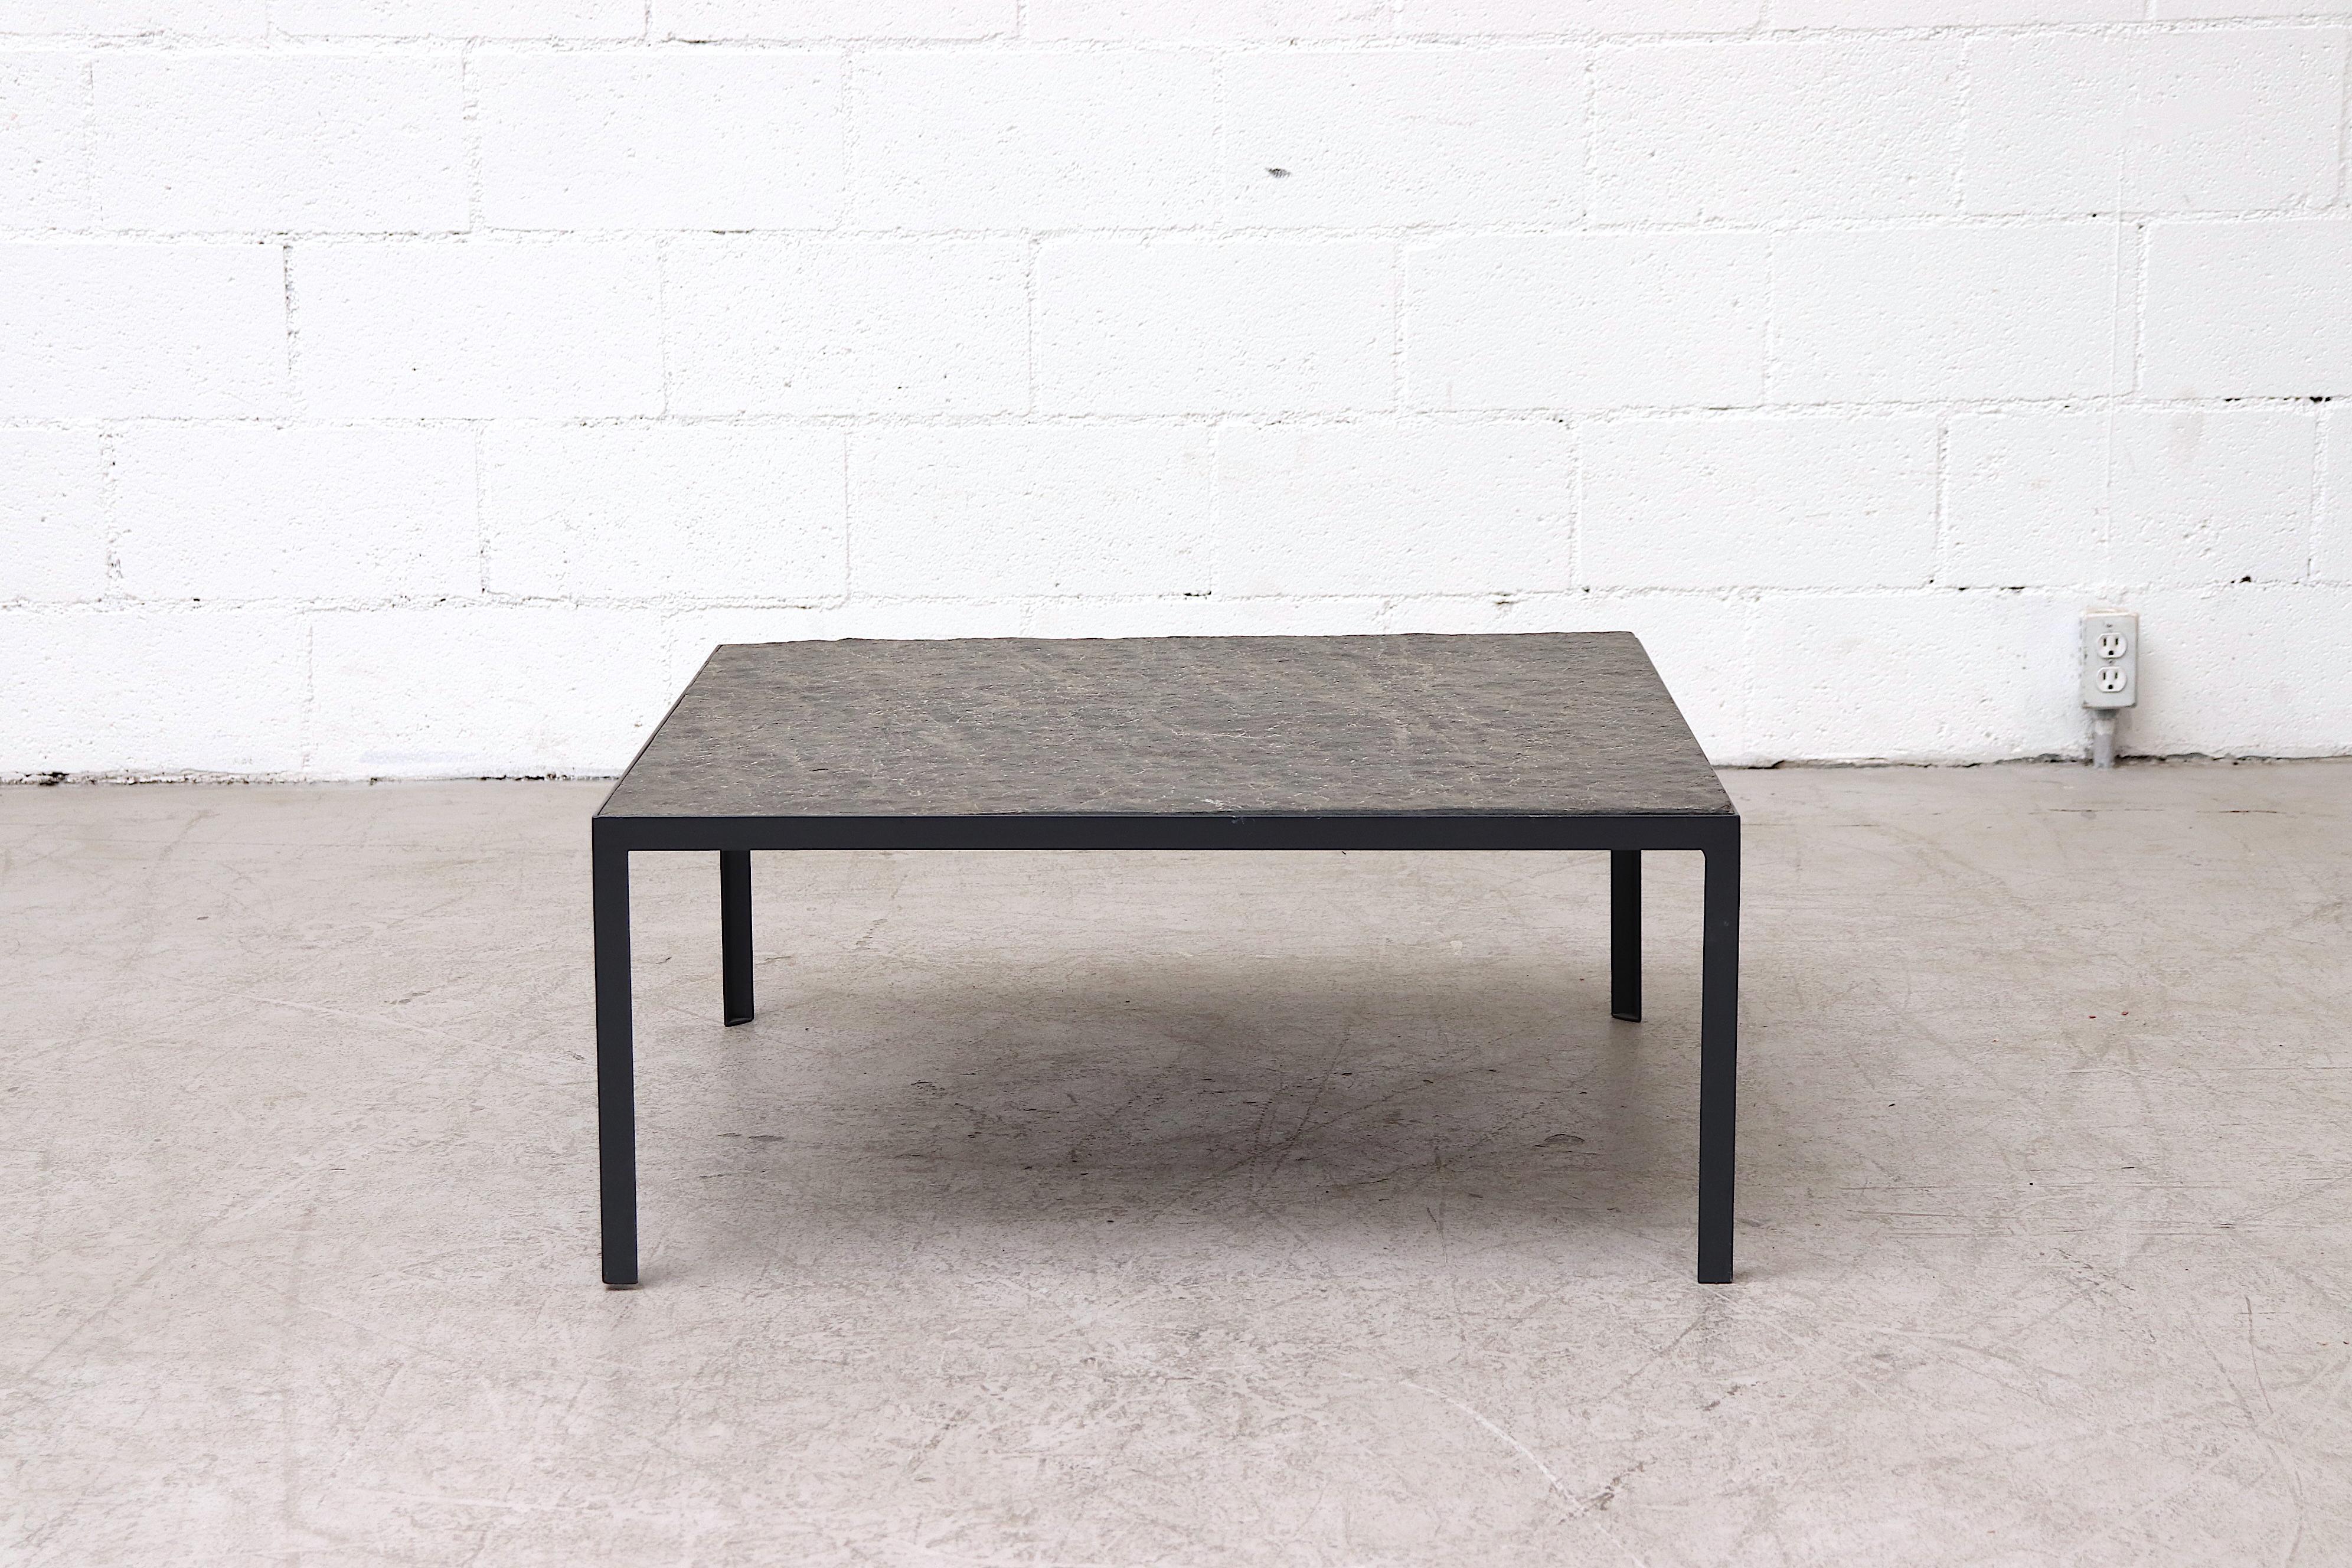 Incredible square coffee table with inset textured stone top and grey enameled metal frame. In original condition with minimal visible wear to top and frame.